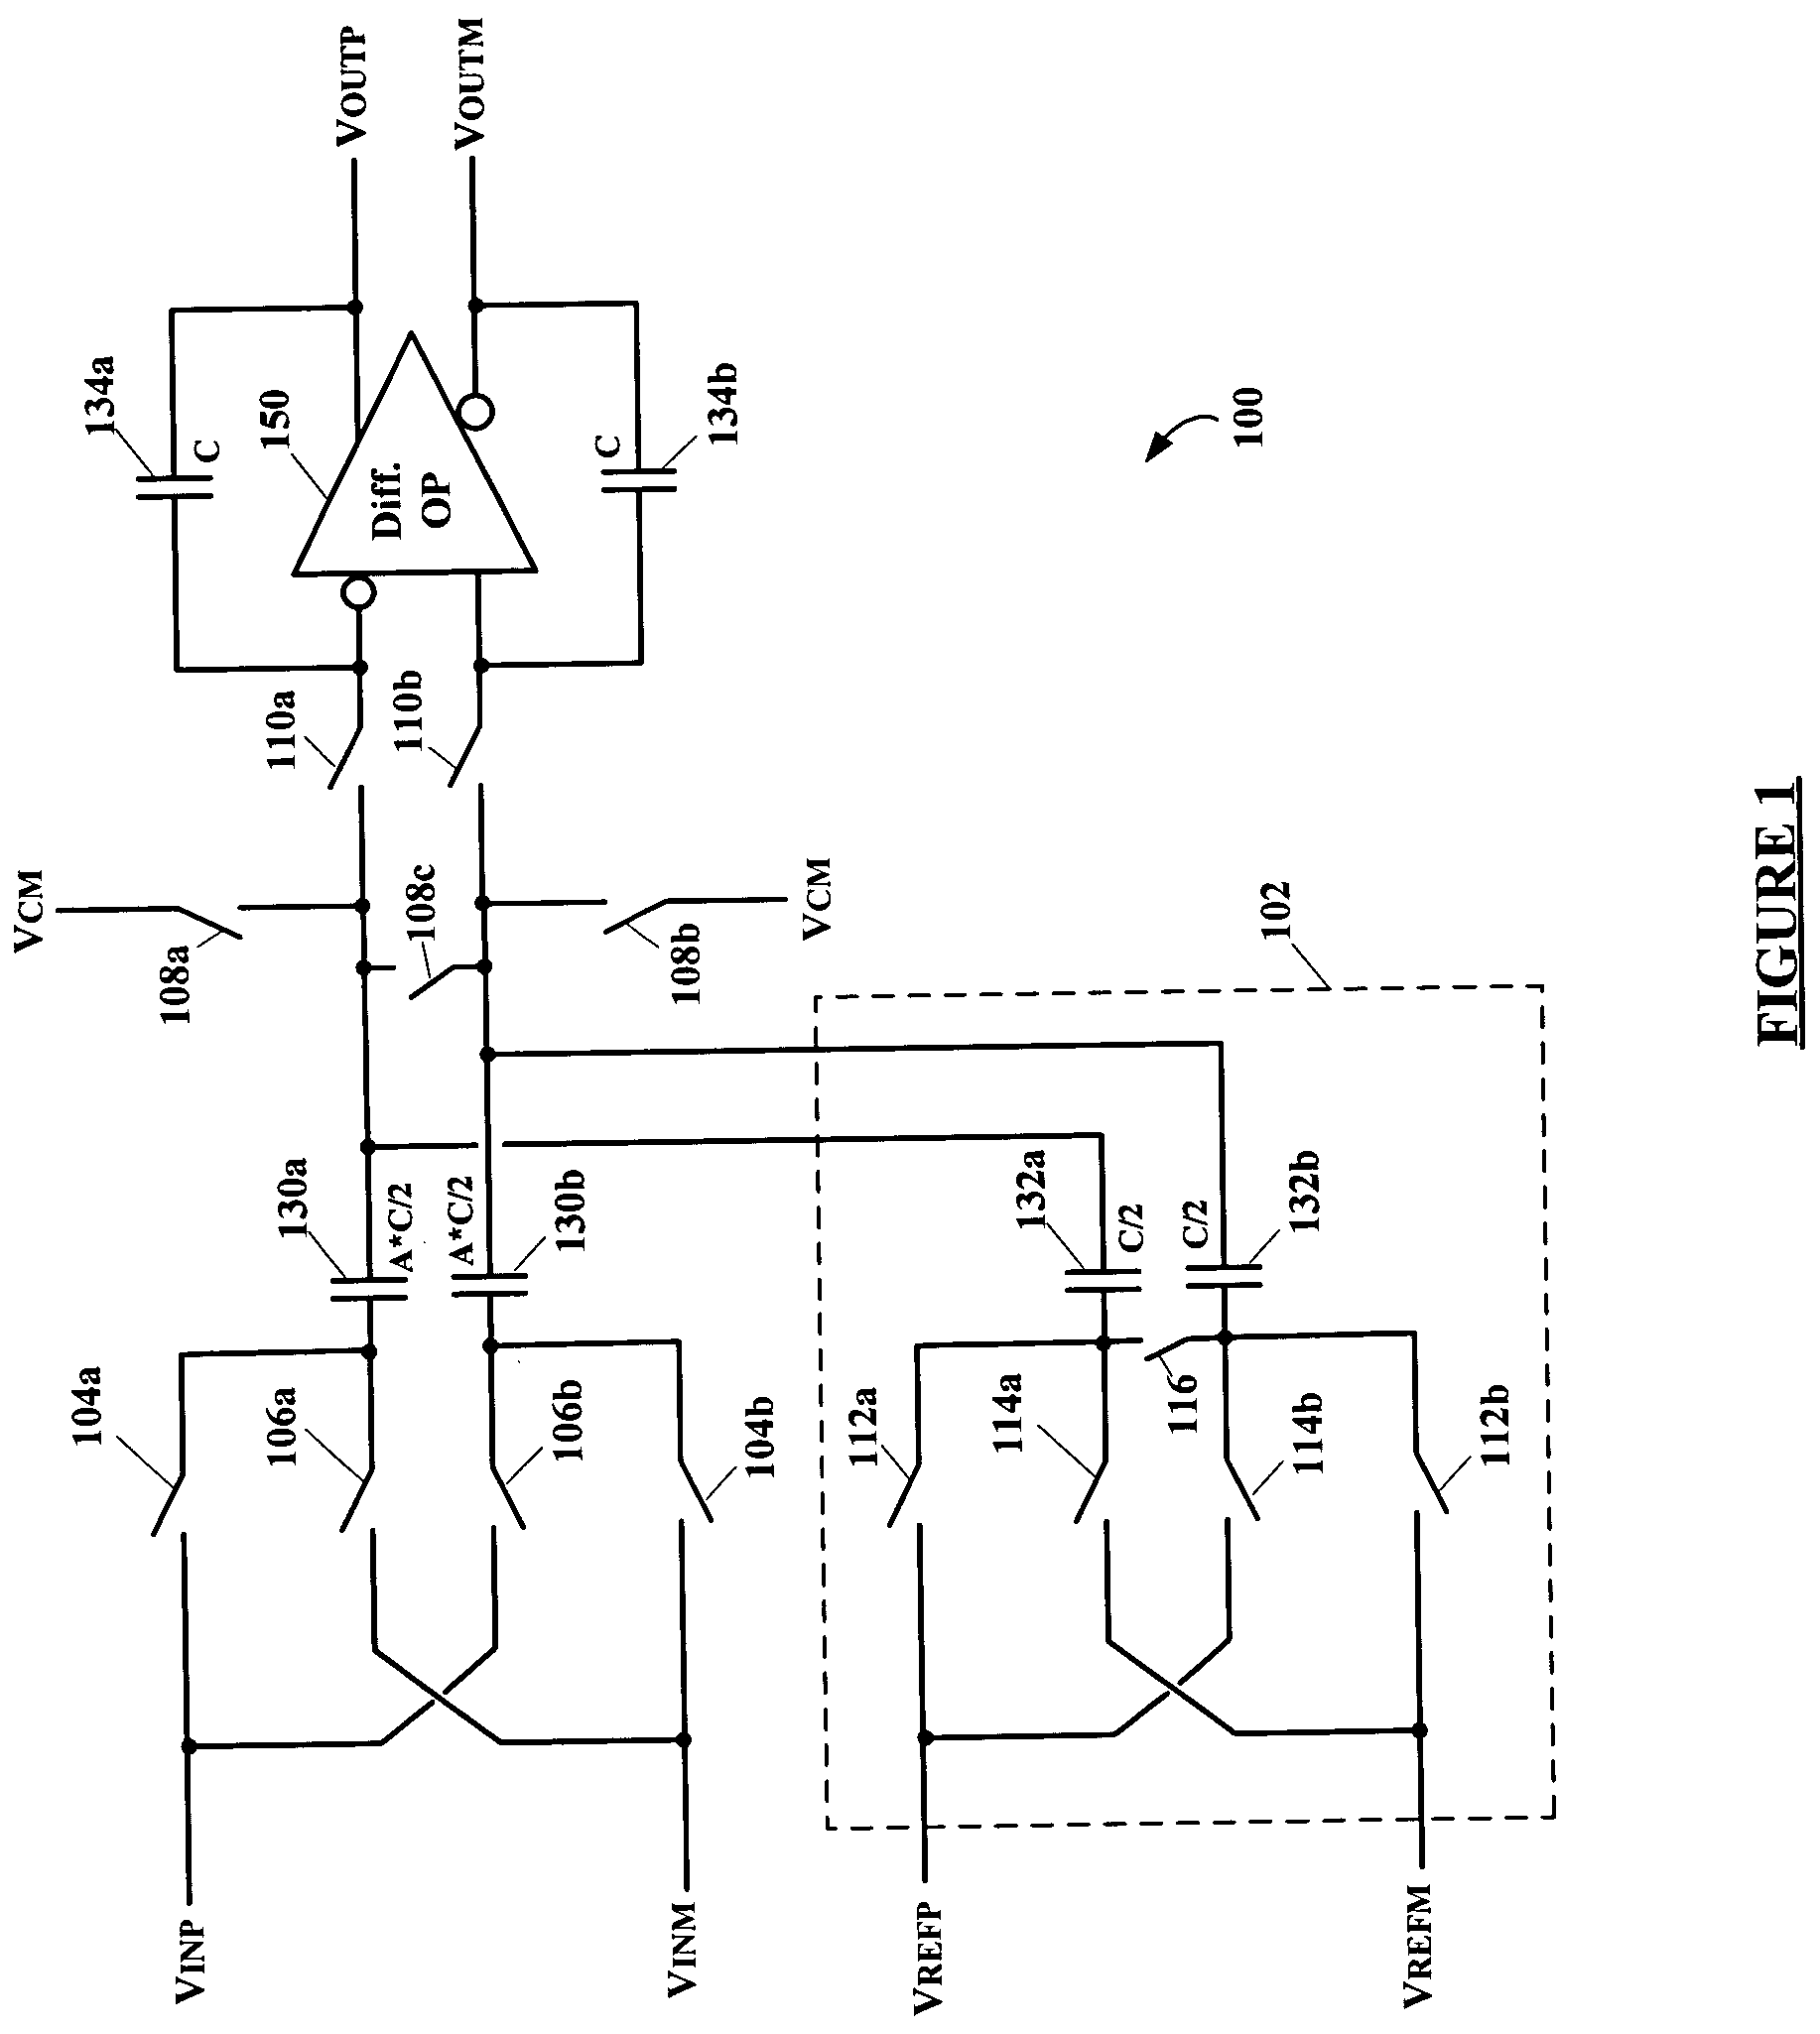 Five-level feed-back digital-to-analog converter for a switched capacitor sigma-delta analog-to-digital converter